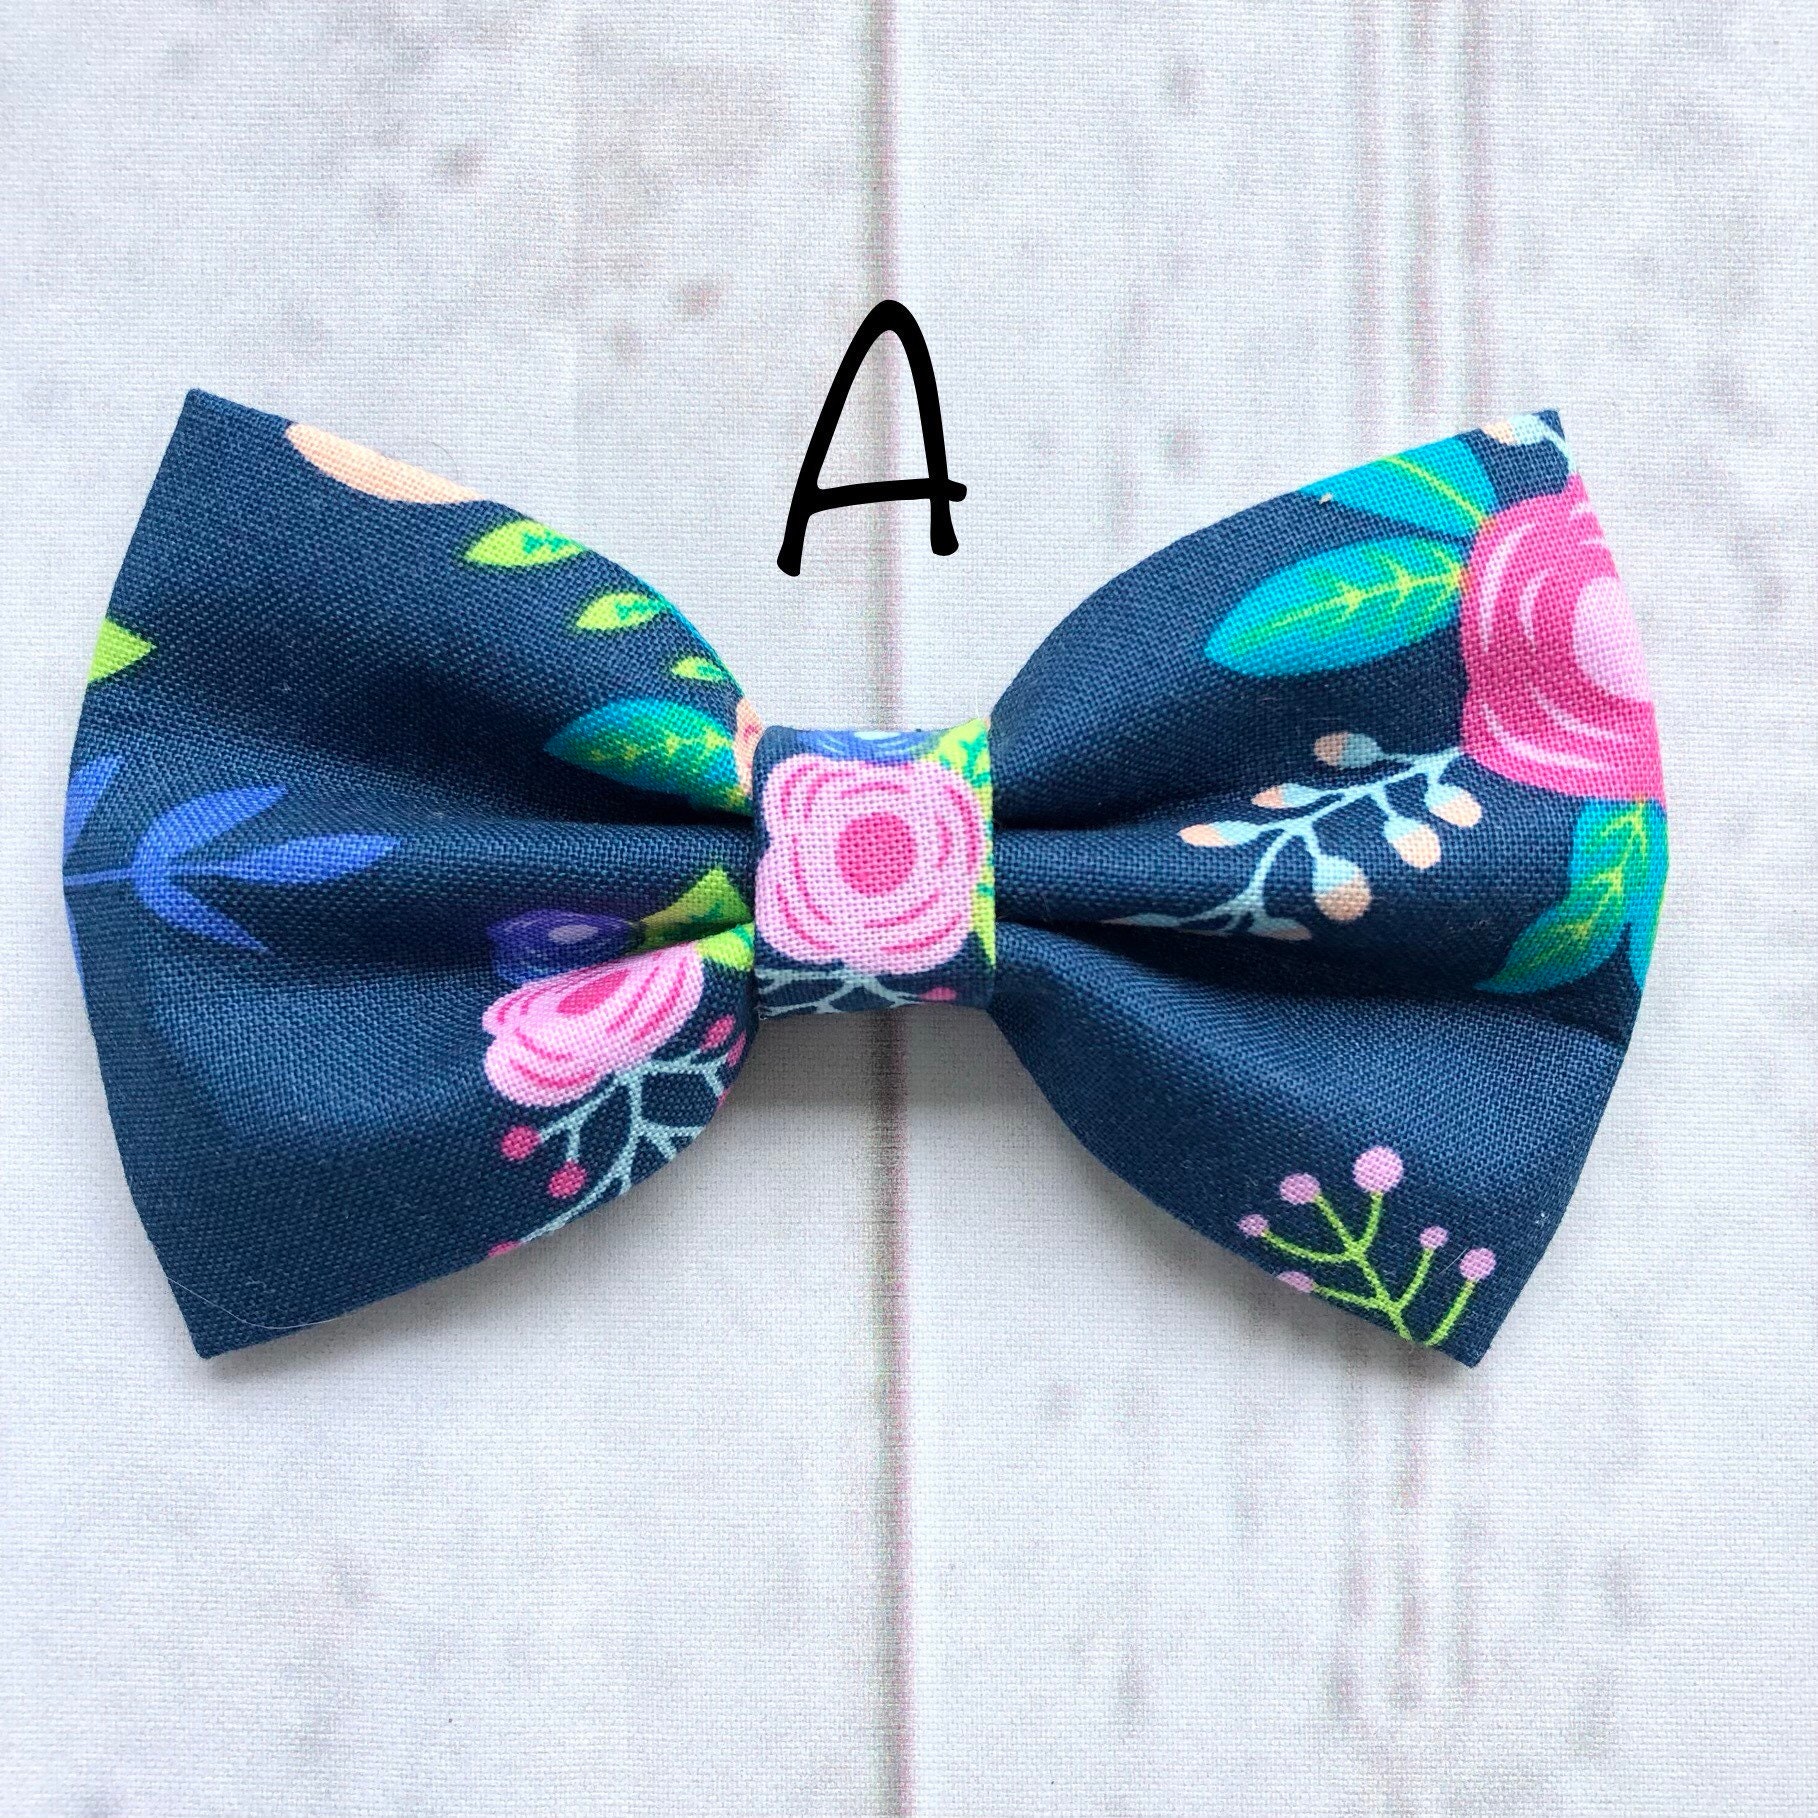 Floral Bow Tie Dog Accessories Dog Clothe Dog Bow tie | Etsy